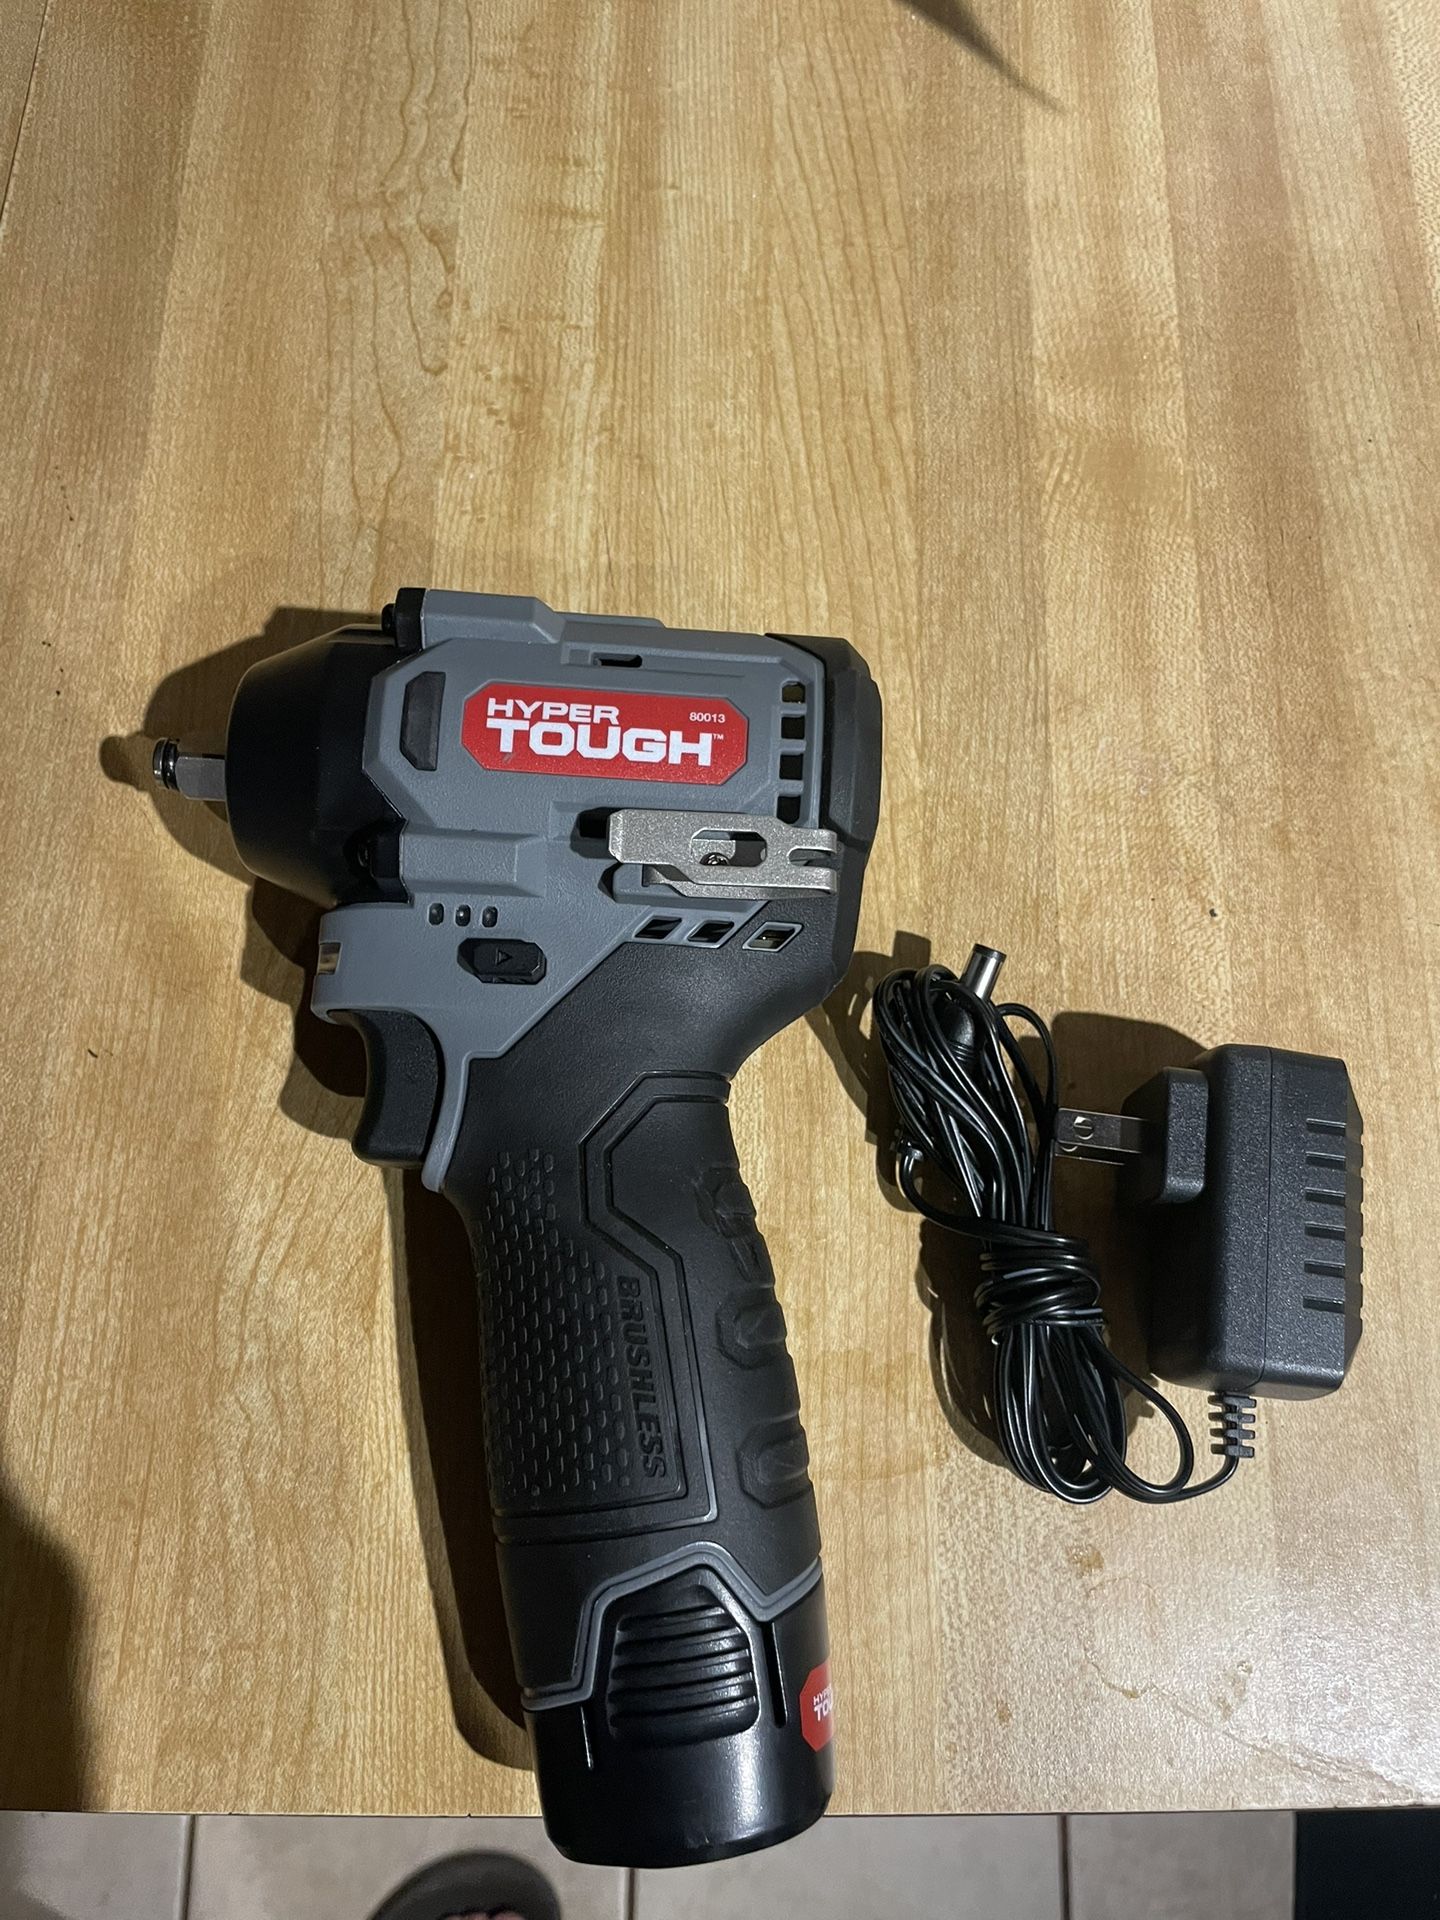 Hyper Tough 3/8 Impact Wrench 12 V With Battery And Charger Like New $65 In N Lakeland 